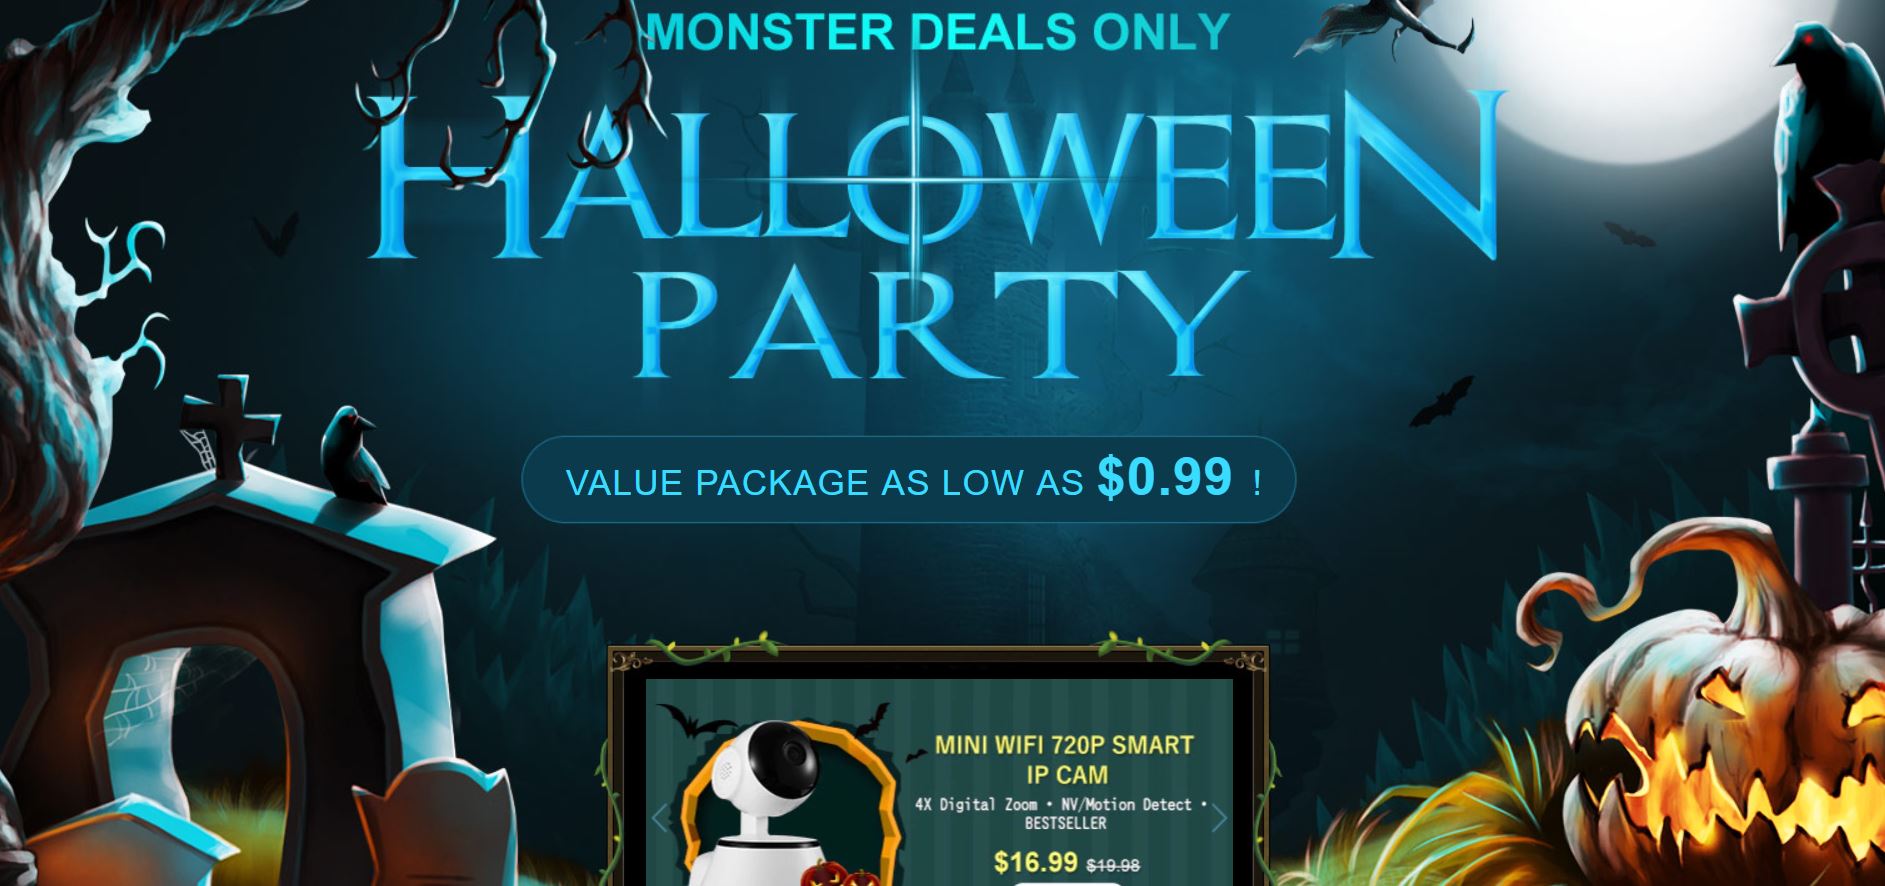 GearBest Halloween Party Gear Flash Sale Best Offers and Coupon Code 2